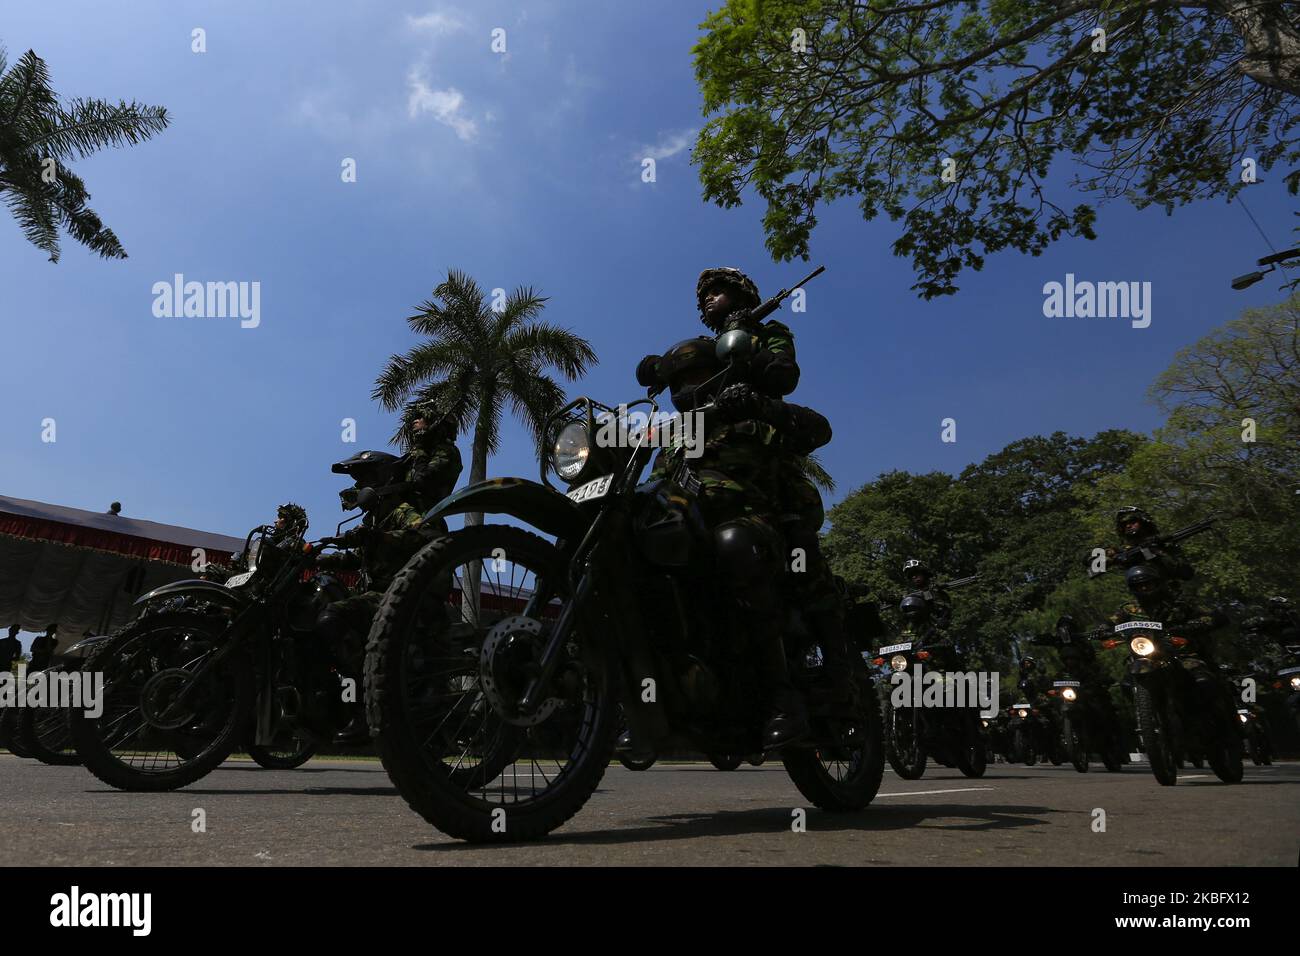 Sri Lankan Special Task Force motor cycle attack squad is seen during a rehearsal session for Independence day celebrations at the Independence Square, Colombo, Sri Lanka on Friday 31 January 2020. The 72nd National Independence Day celebrations of Sri Lanka will be held at the Independence Square in capital Colombo under the theme 'A Secured Nation - A Prosperous Country' (Photo by Tharaka Basnayaka/NurPhoto) Stock Photo